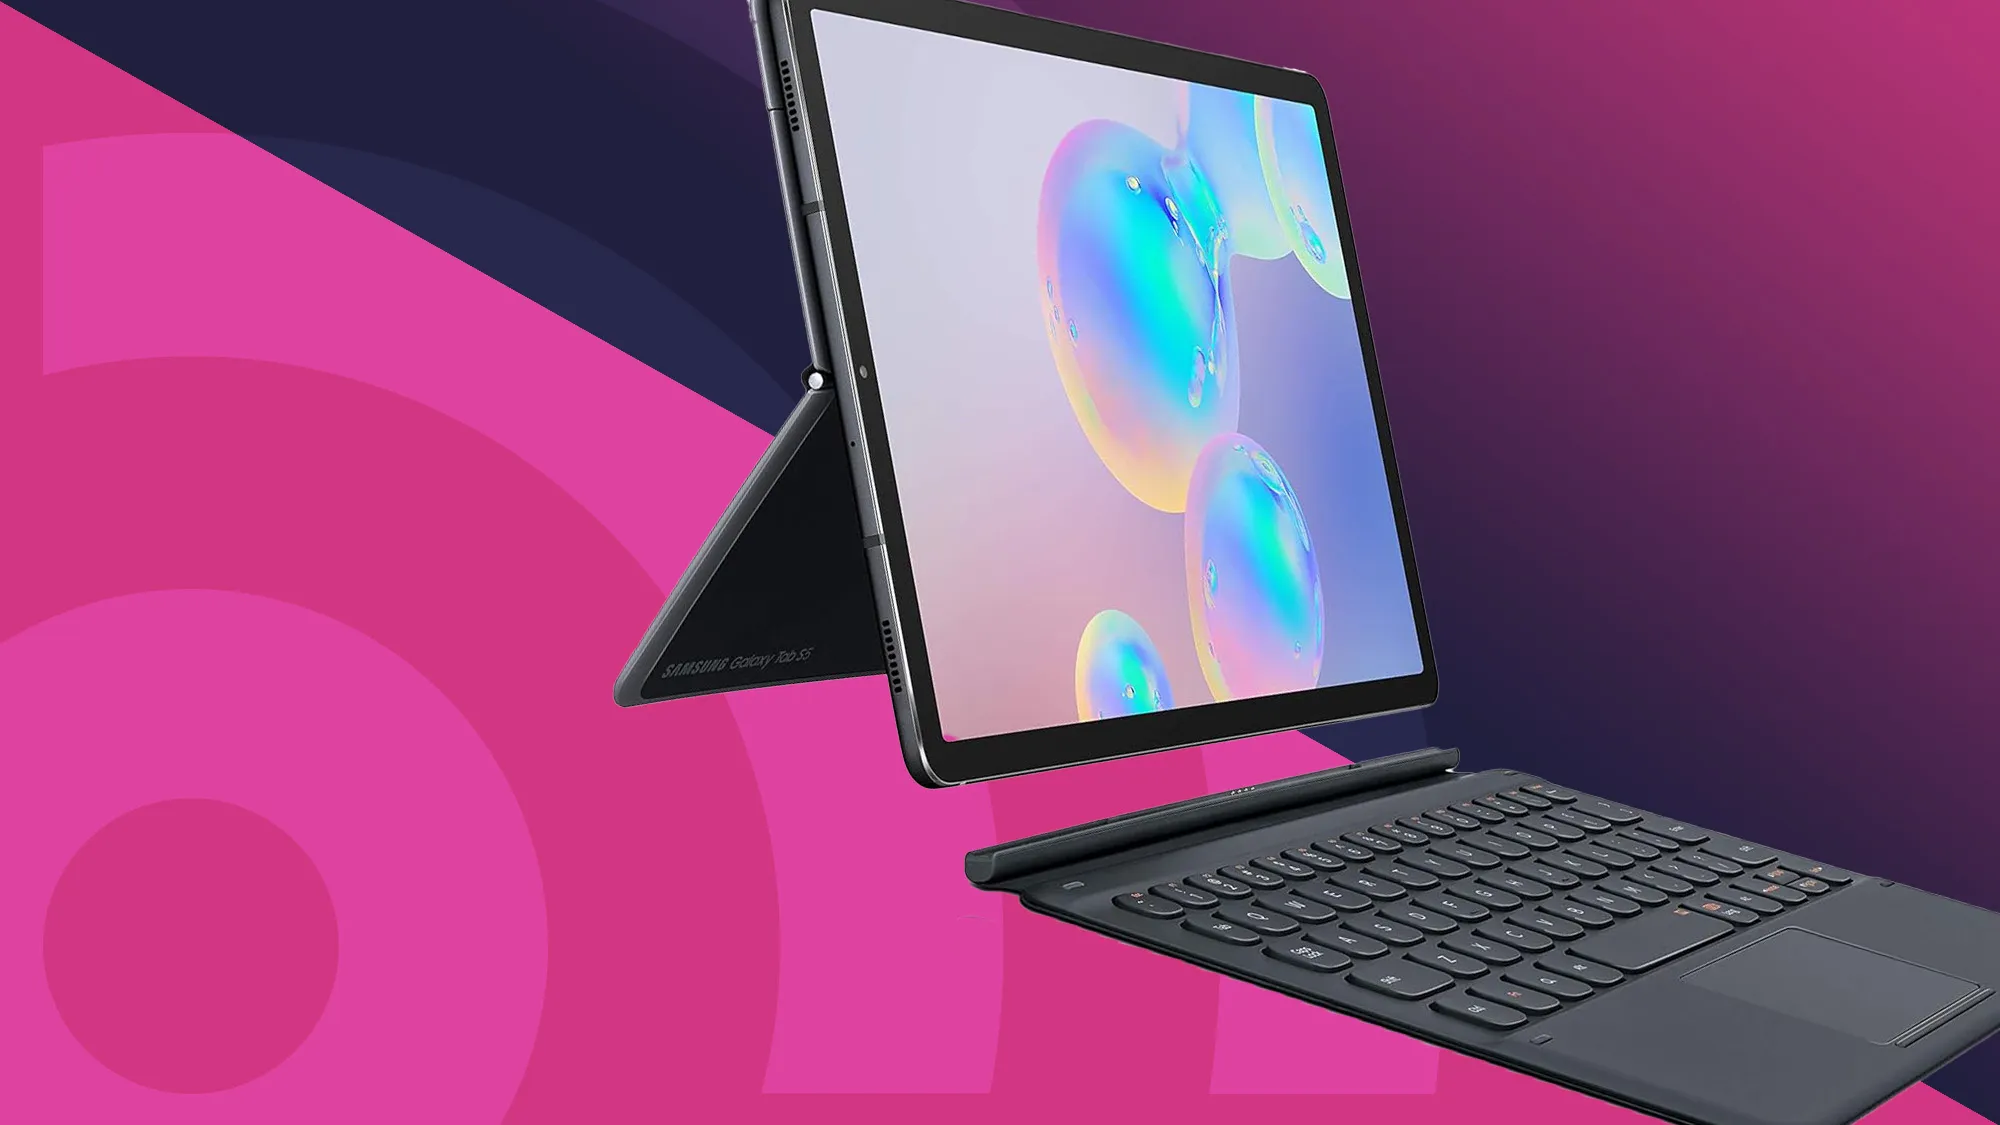 Ergonomic Tablet Keyboards: Are They Worth the Investment?